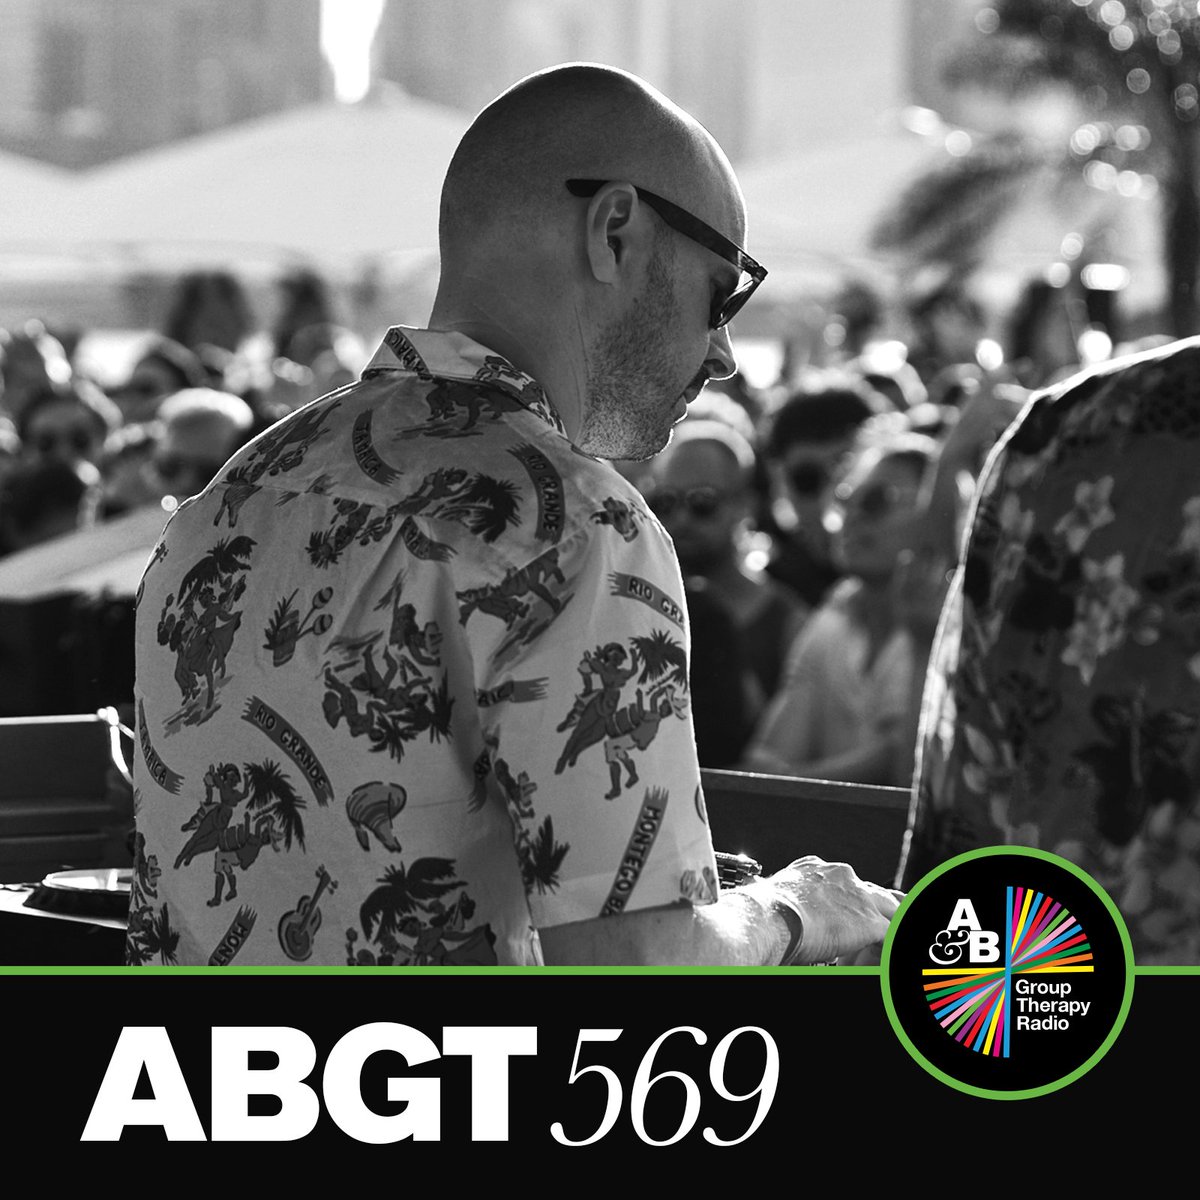 Tonight on ABGT: we've got world-exclusives from @ayokay, @gvnmusic, @darrentate, @KyauAndAlbert + Jaytech on the guest mix💿 Join @jonogrant from 7pm GMT ⏰